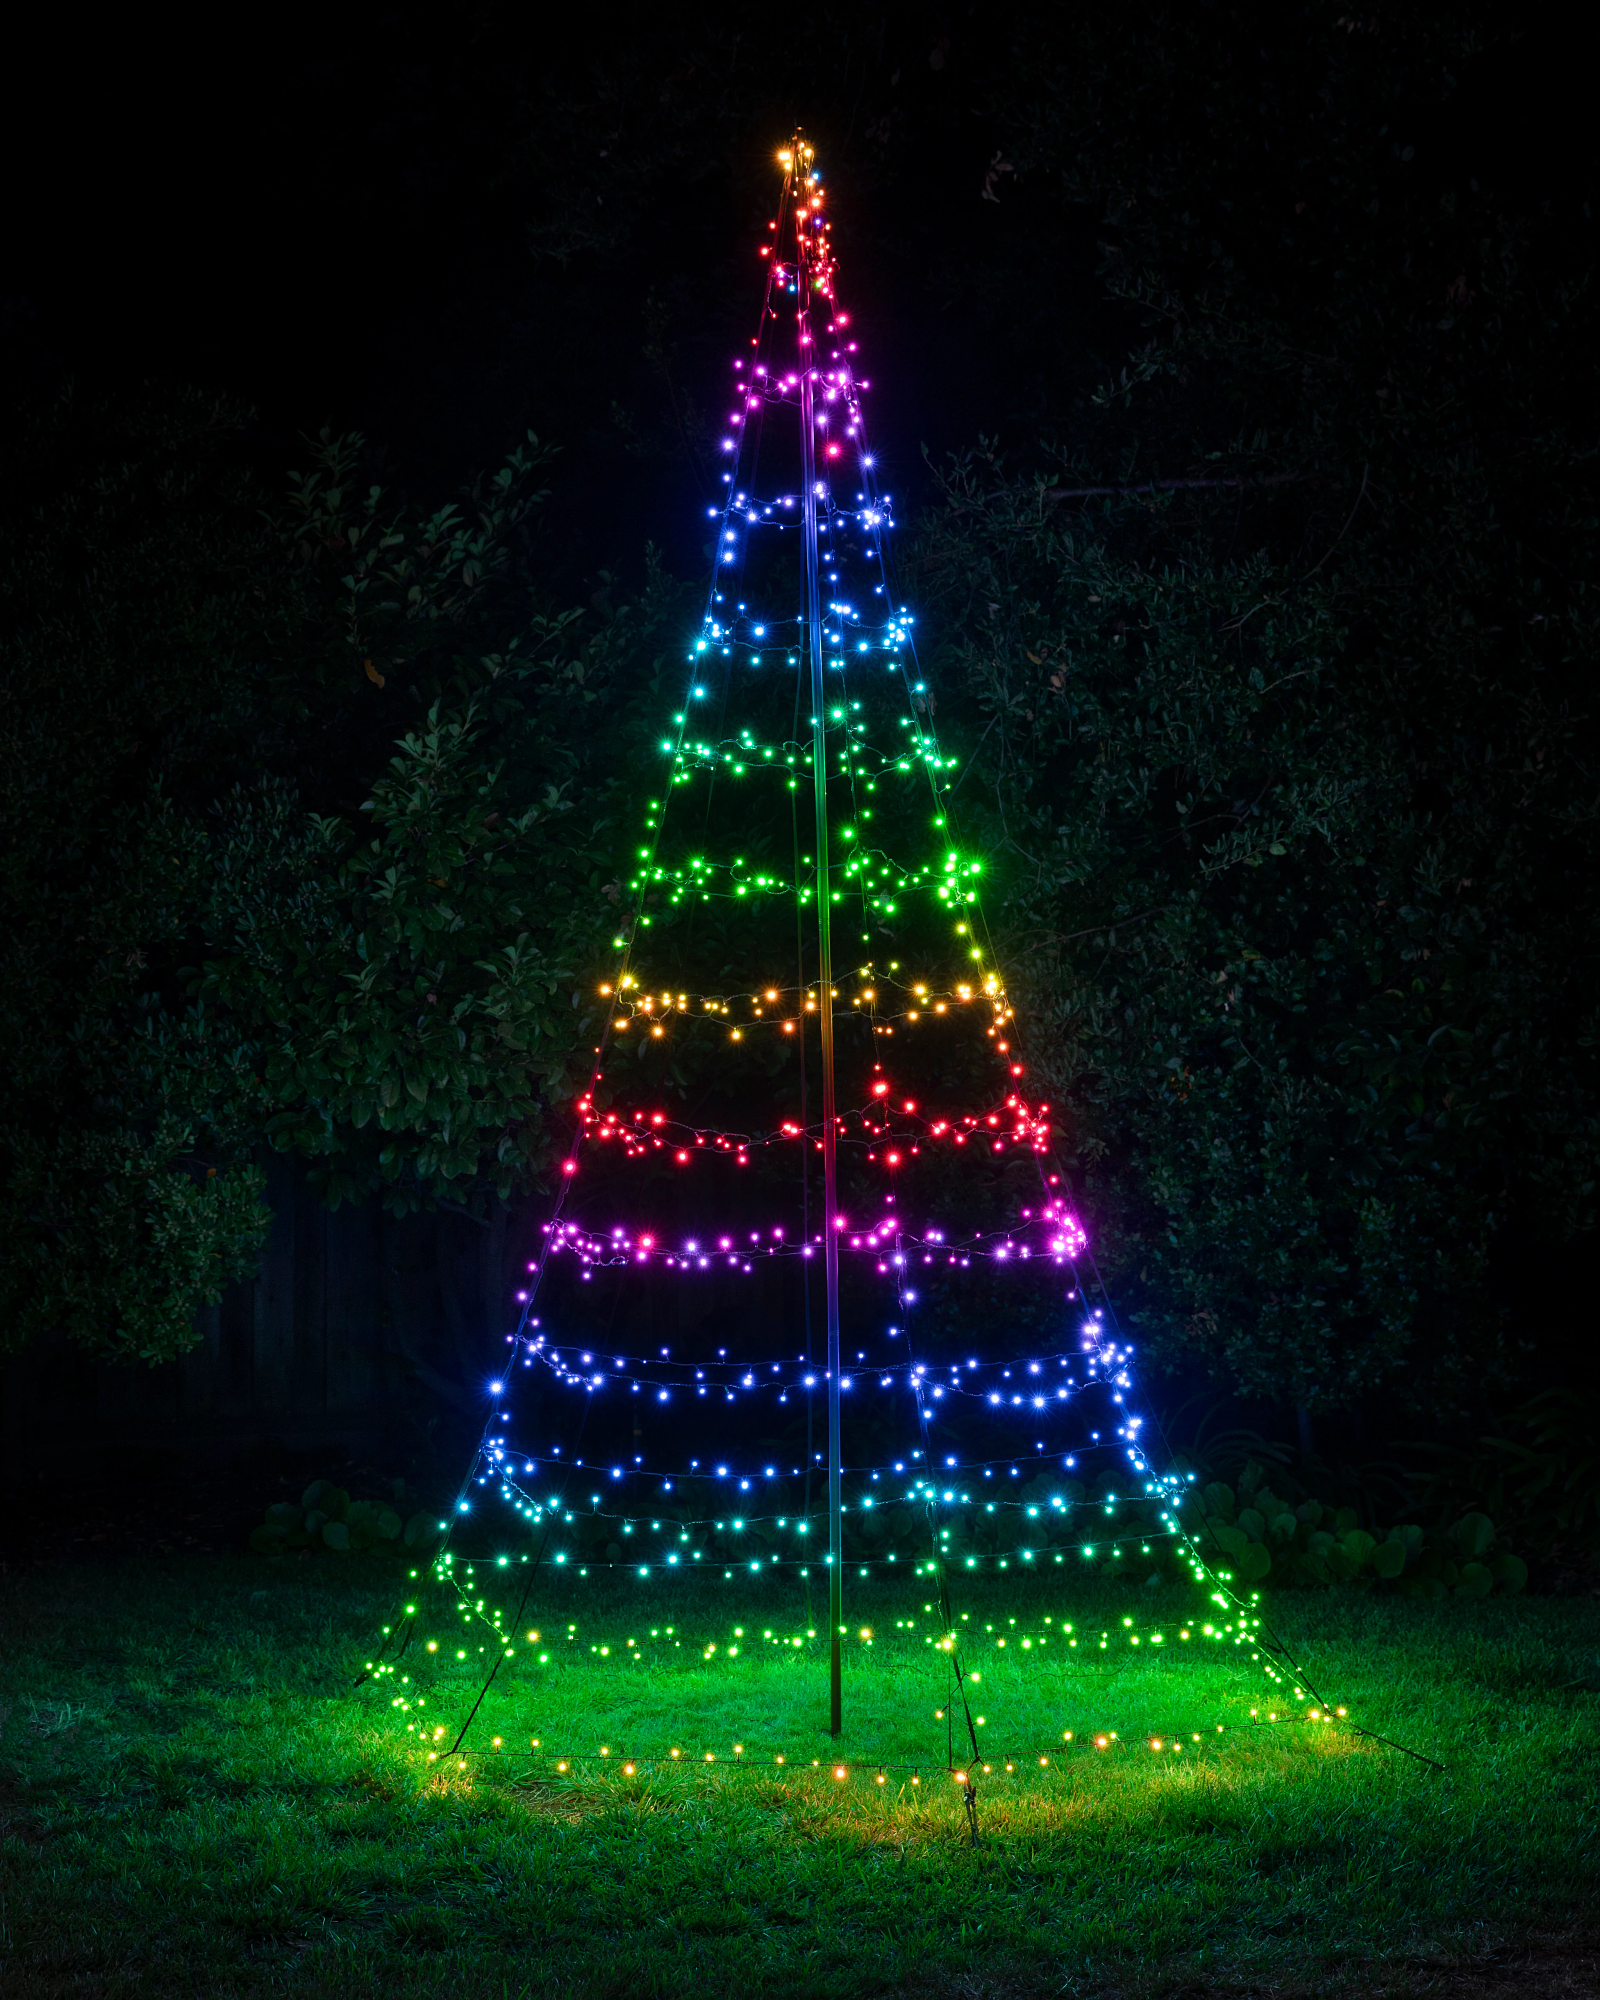 https://source.widen.net/content/ymzmscnlt8/jpeg/WRG-2141030_13ft-Twinkly-Cone-Tree_SSC.jpeg?w=1600&h=2000&keep=c&crop=yes&color=cccccc&quality=100&u=7mzq6p